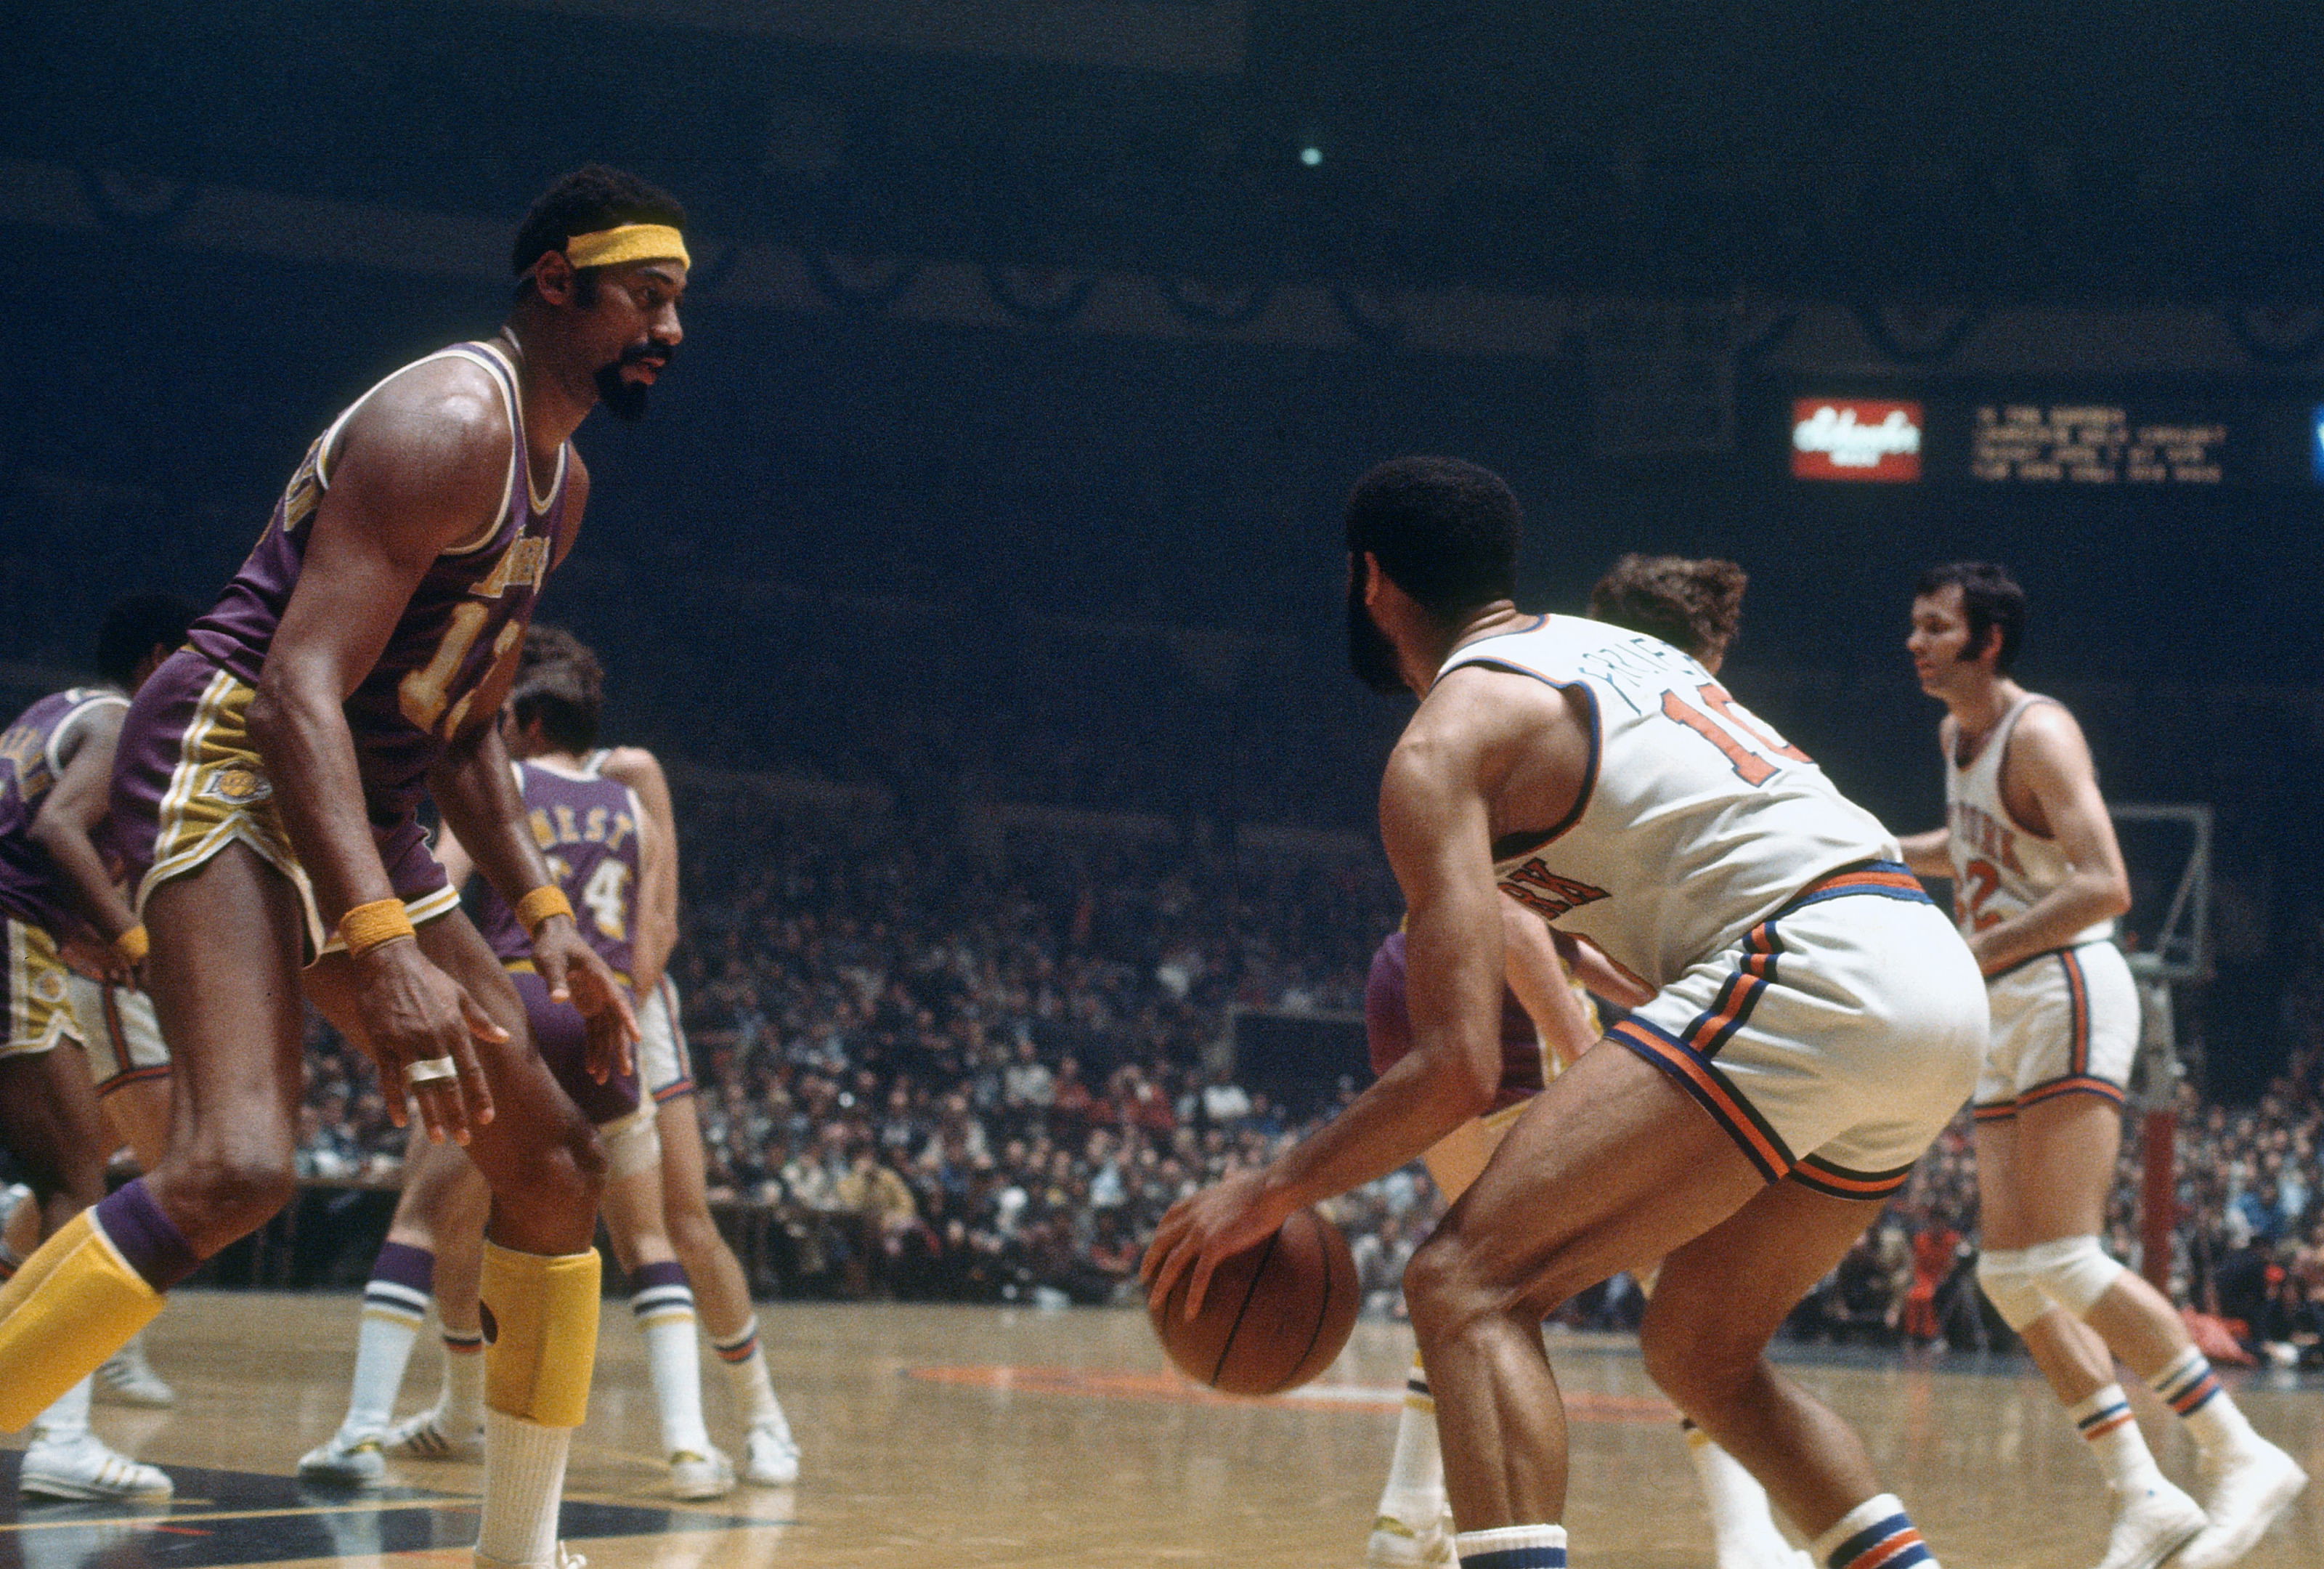 Los Angeles Lakers: 3 other legends whose numbers should be retired